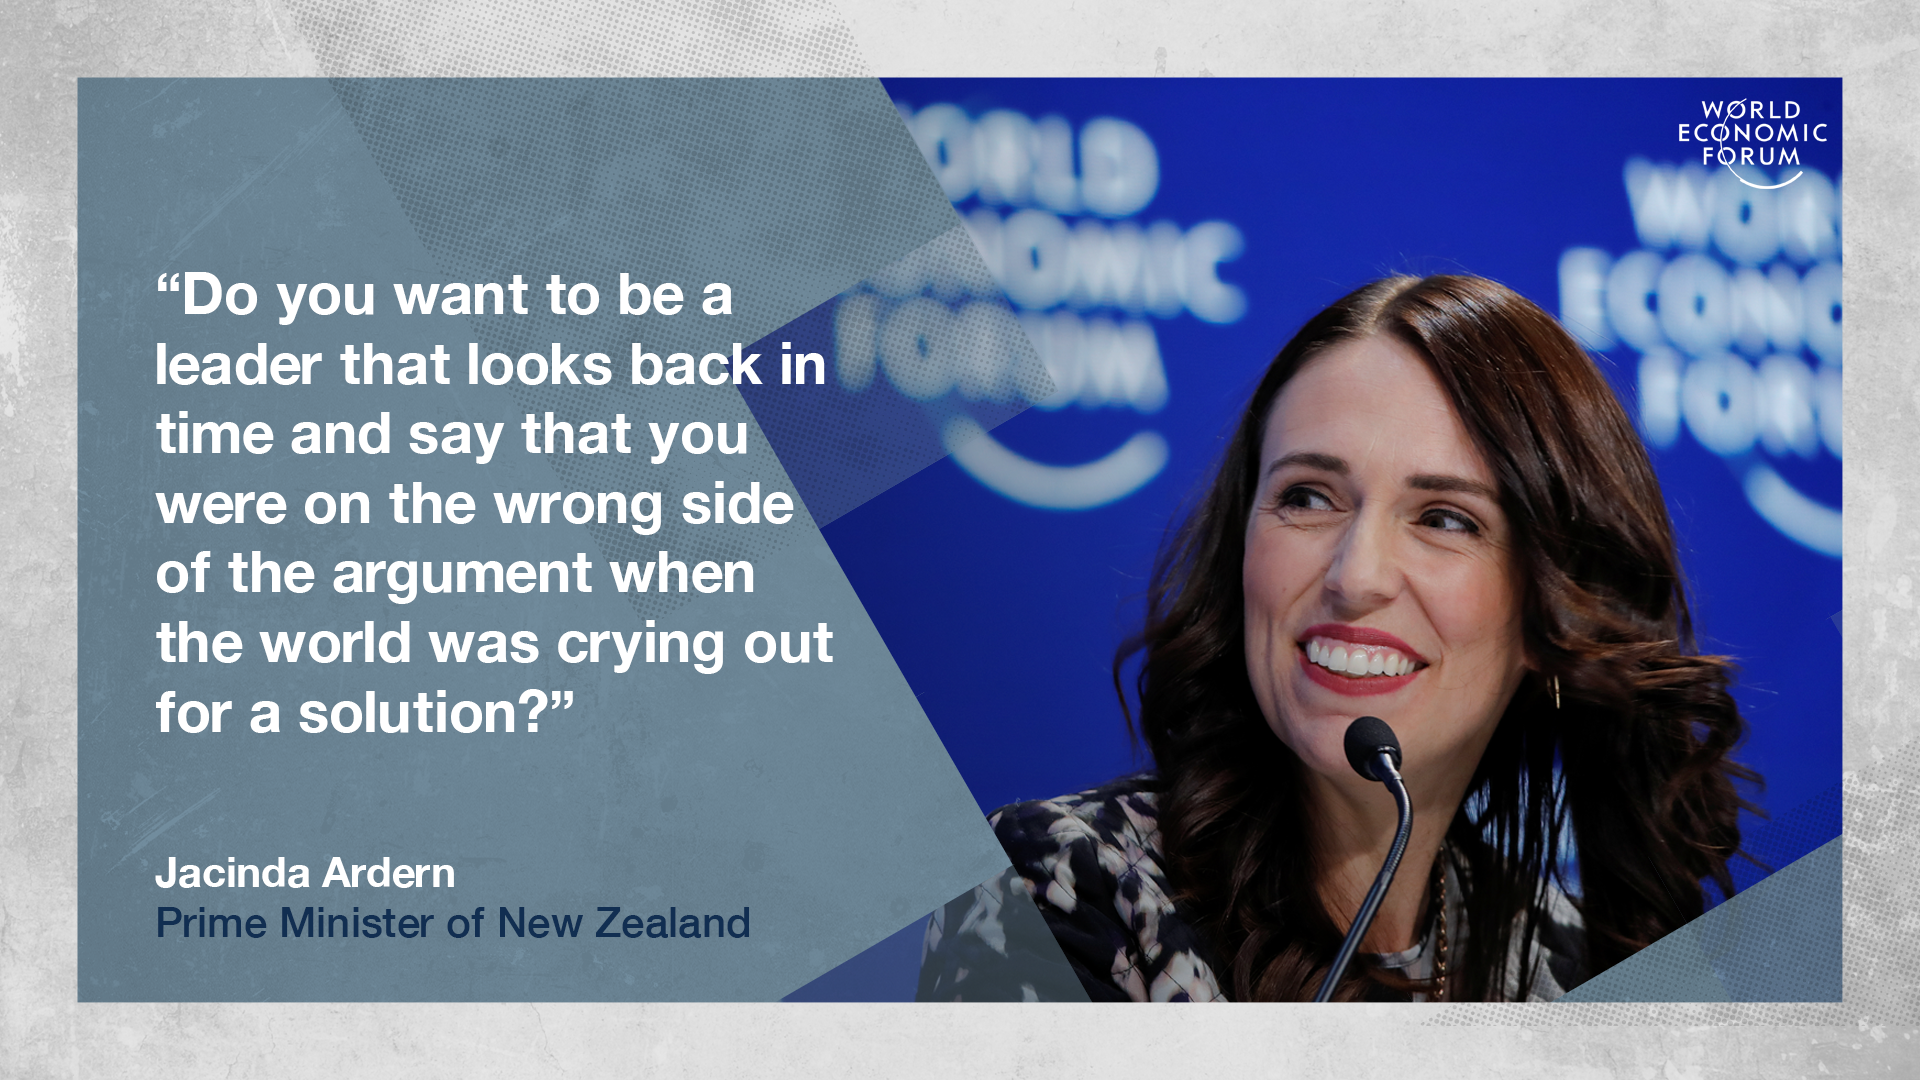 Jacinda Ardern's advice for world leaders: don't be on the wrong side of history. World Economic Forum